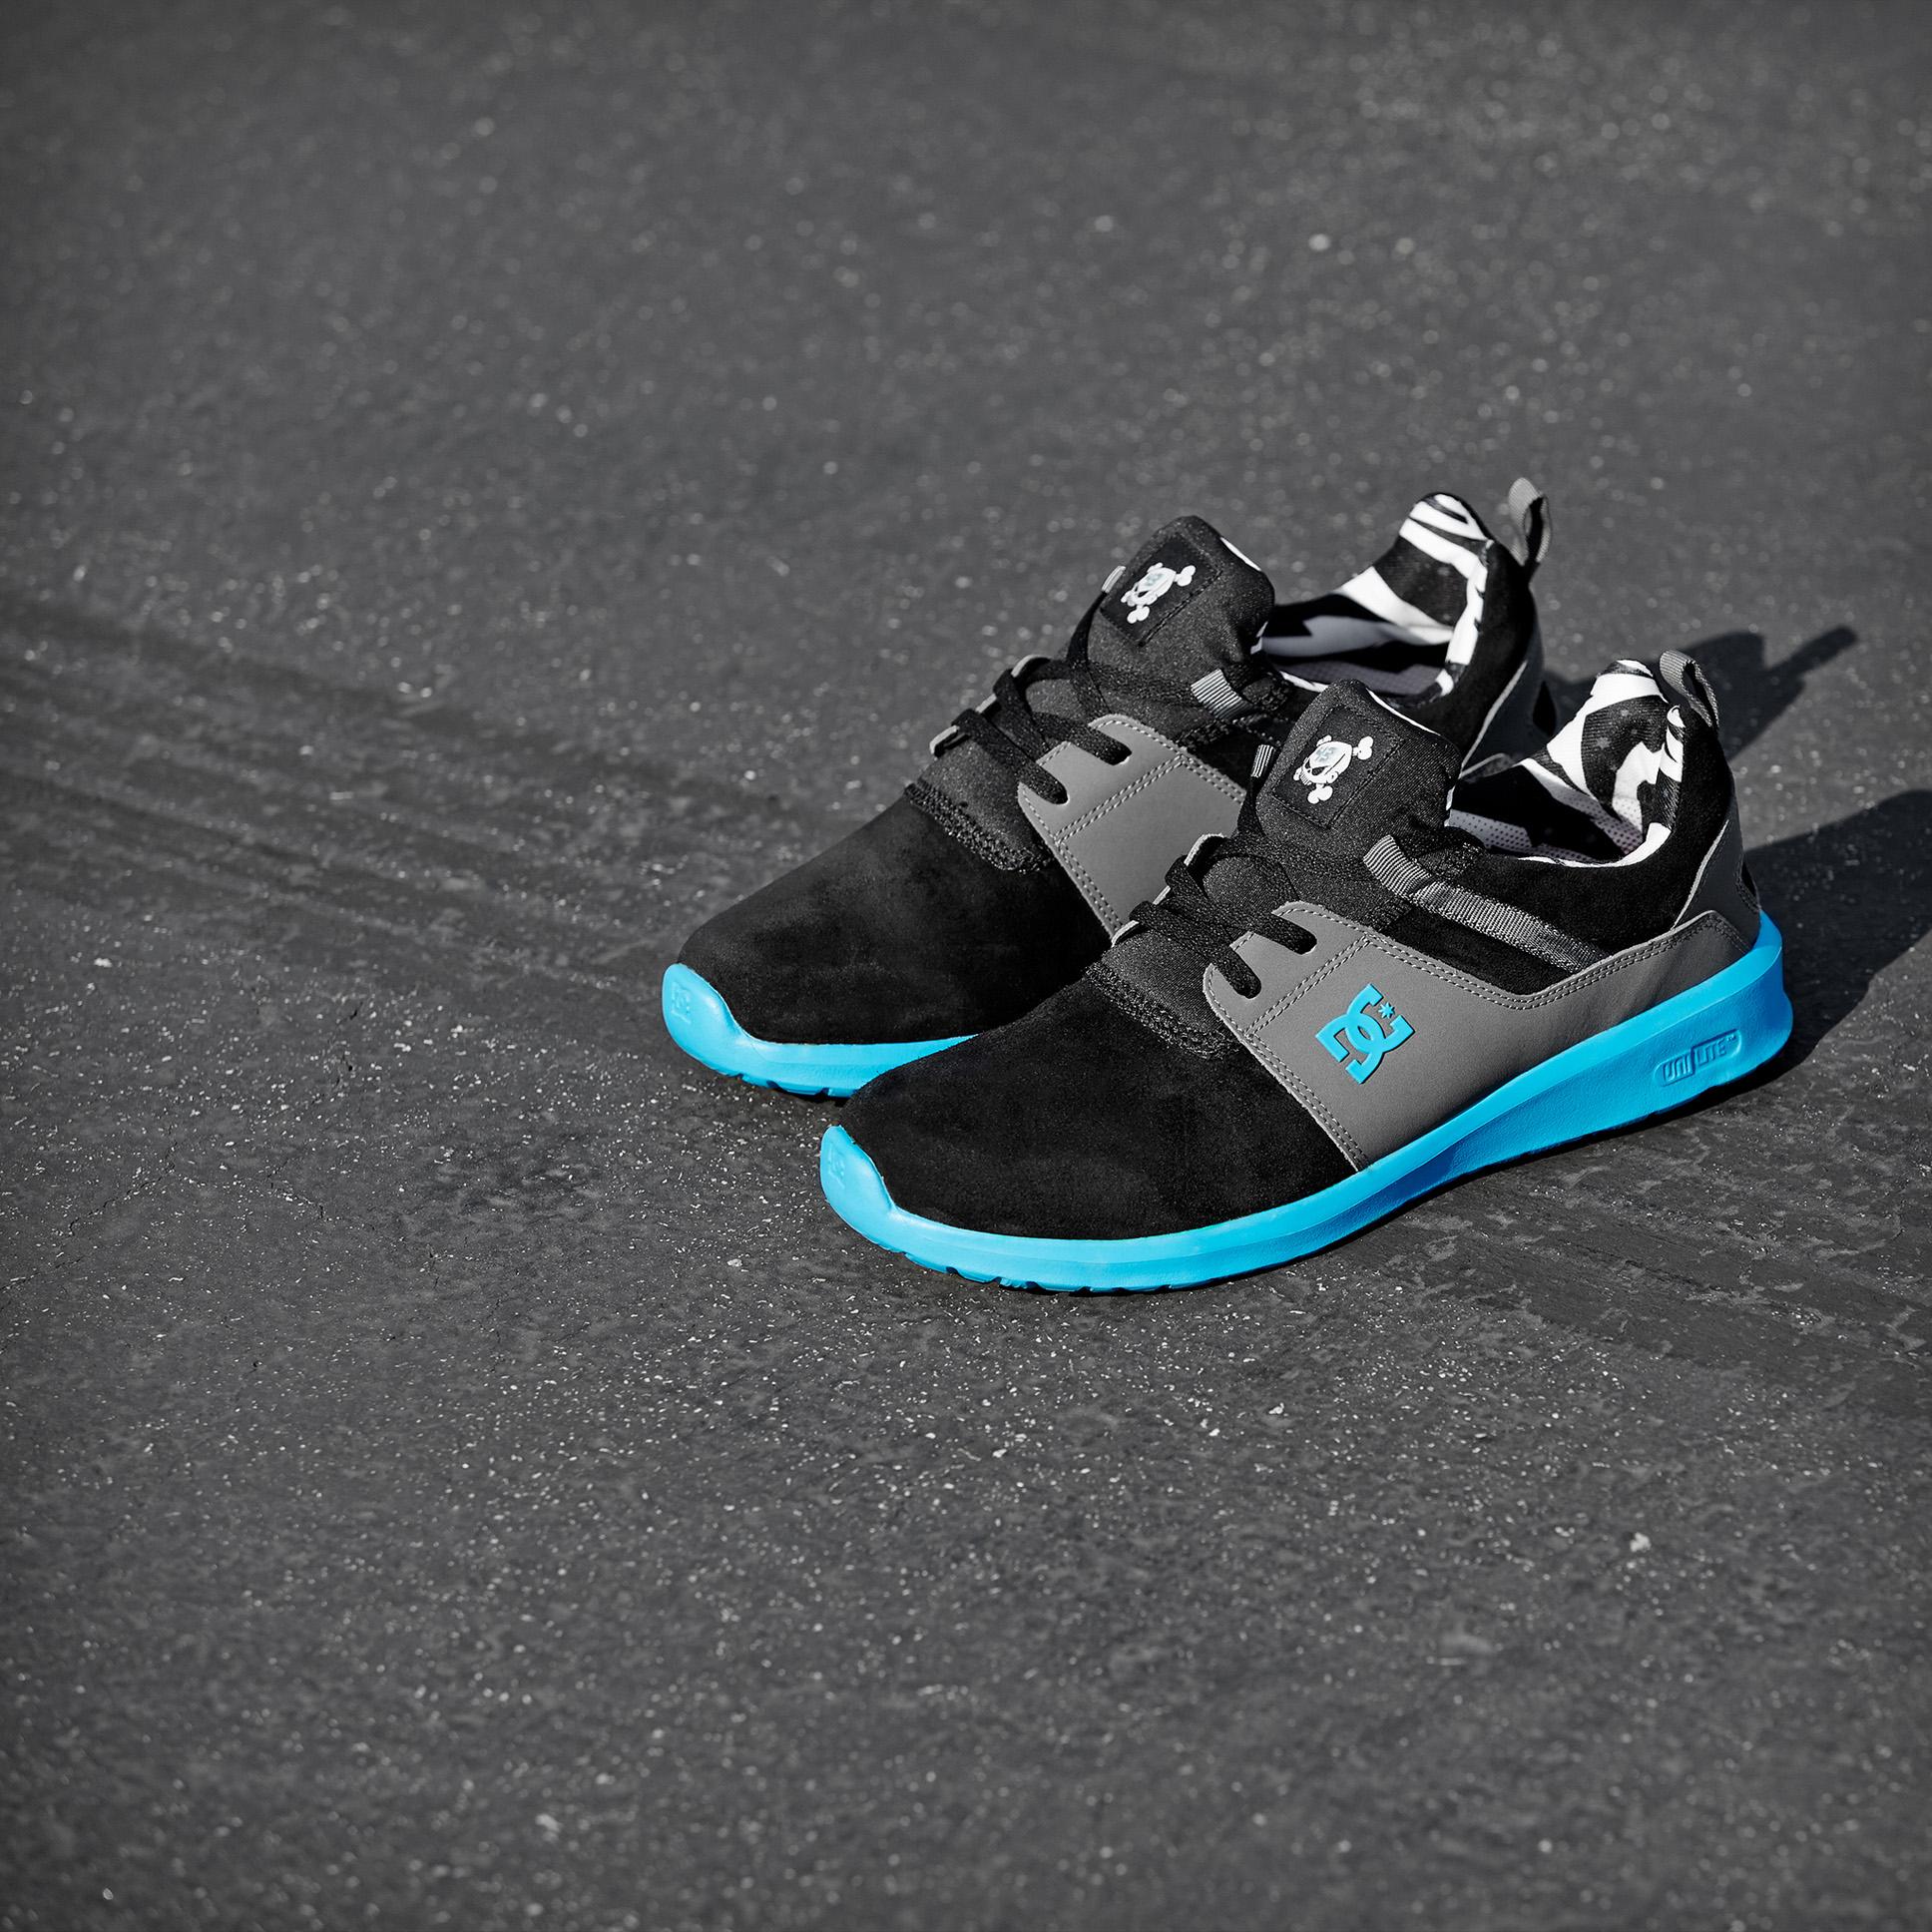 los van blad landheer DC Shoes on Twitter: "The @KBlock43 signature color of the Heathrow is out  now. Get your pair now at: http://t.co/E1DNr9N8O6 http://t.co/yoOnQMHGuy" /  Twitter